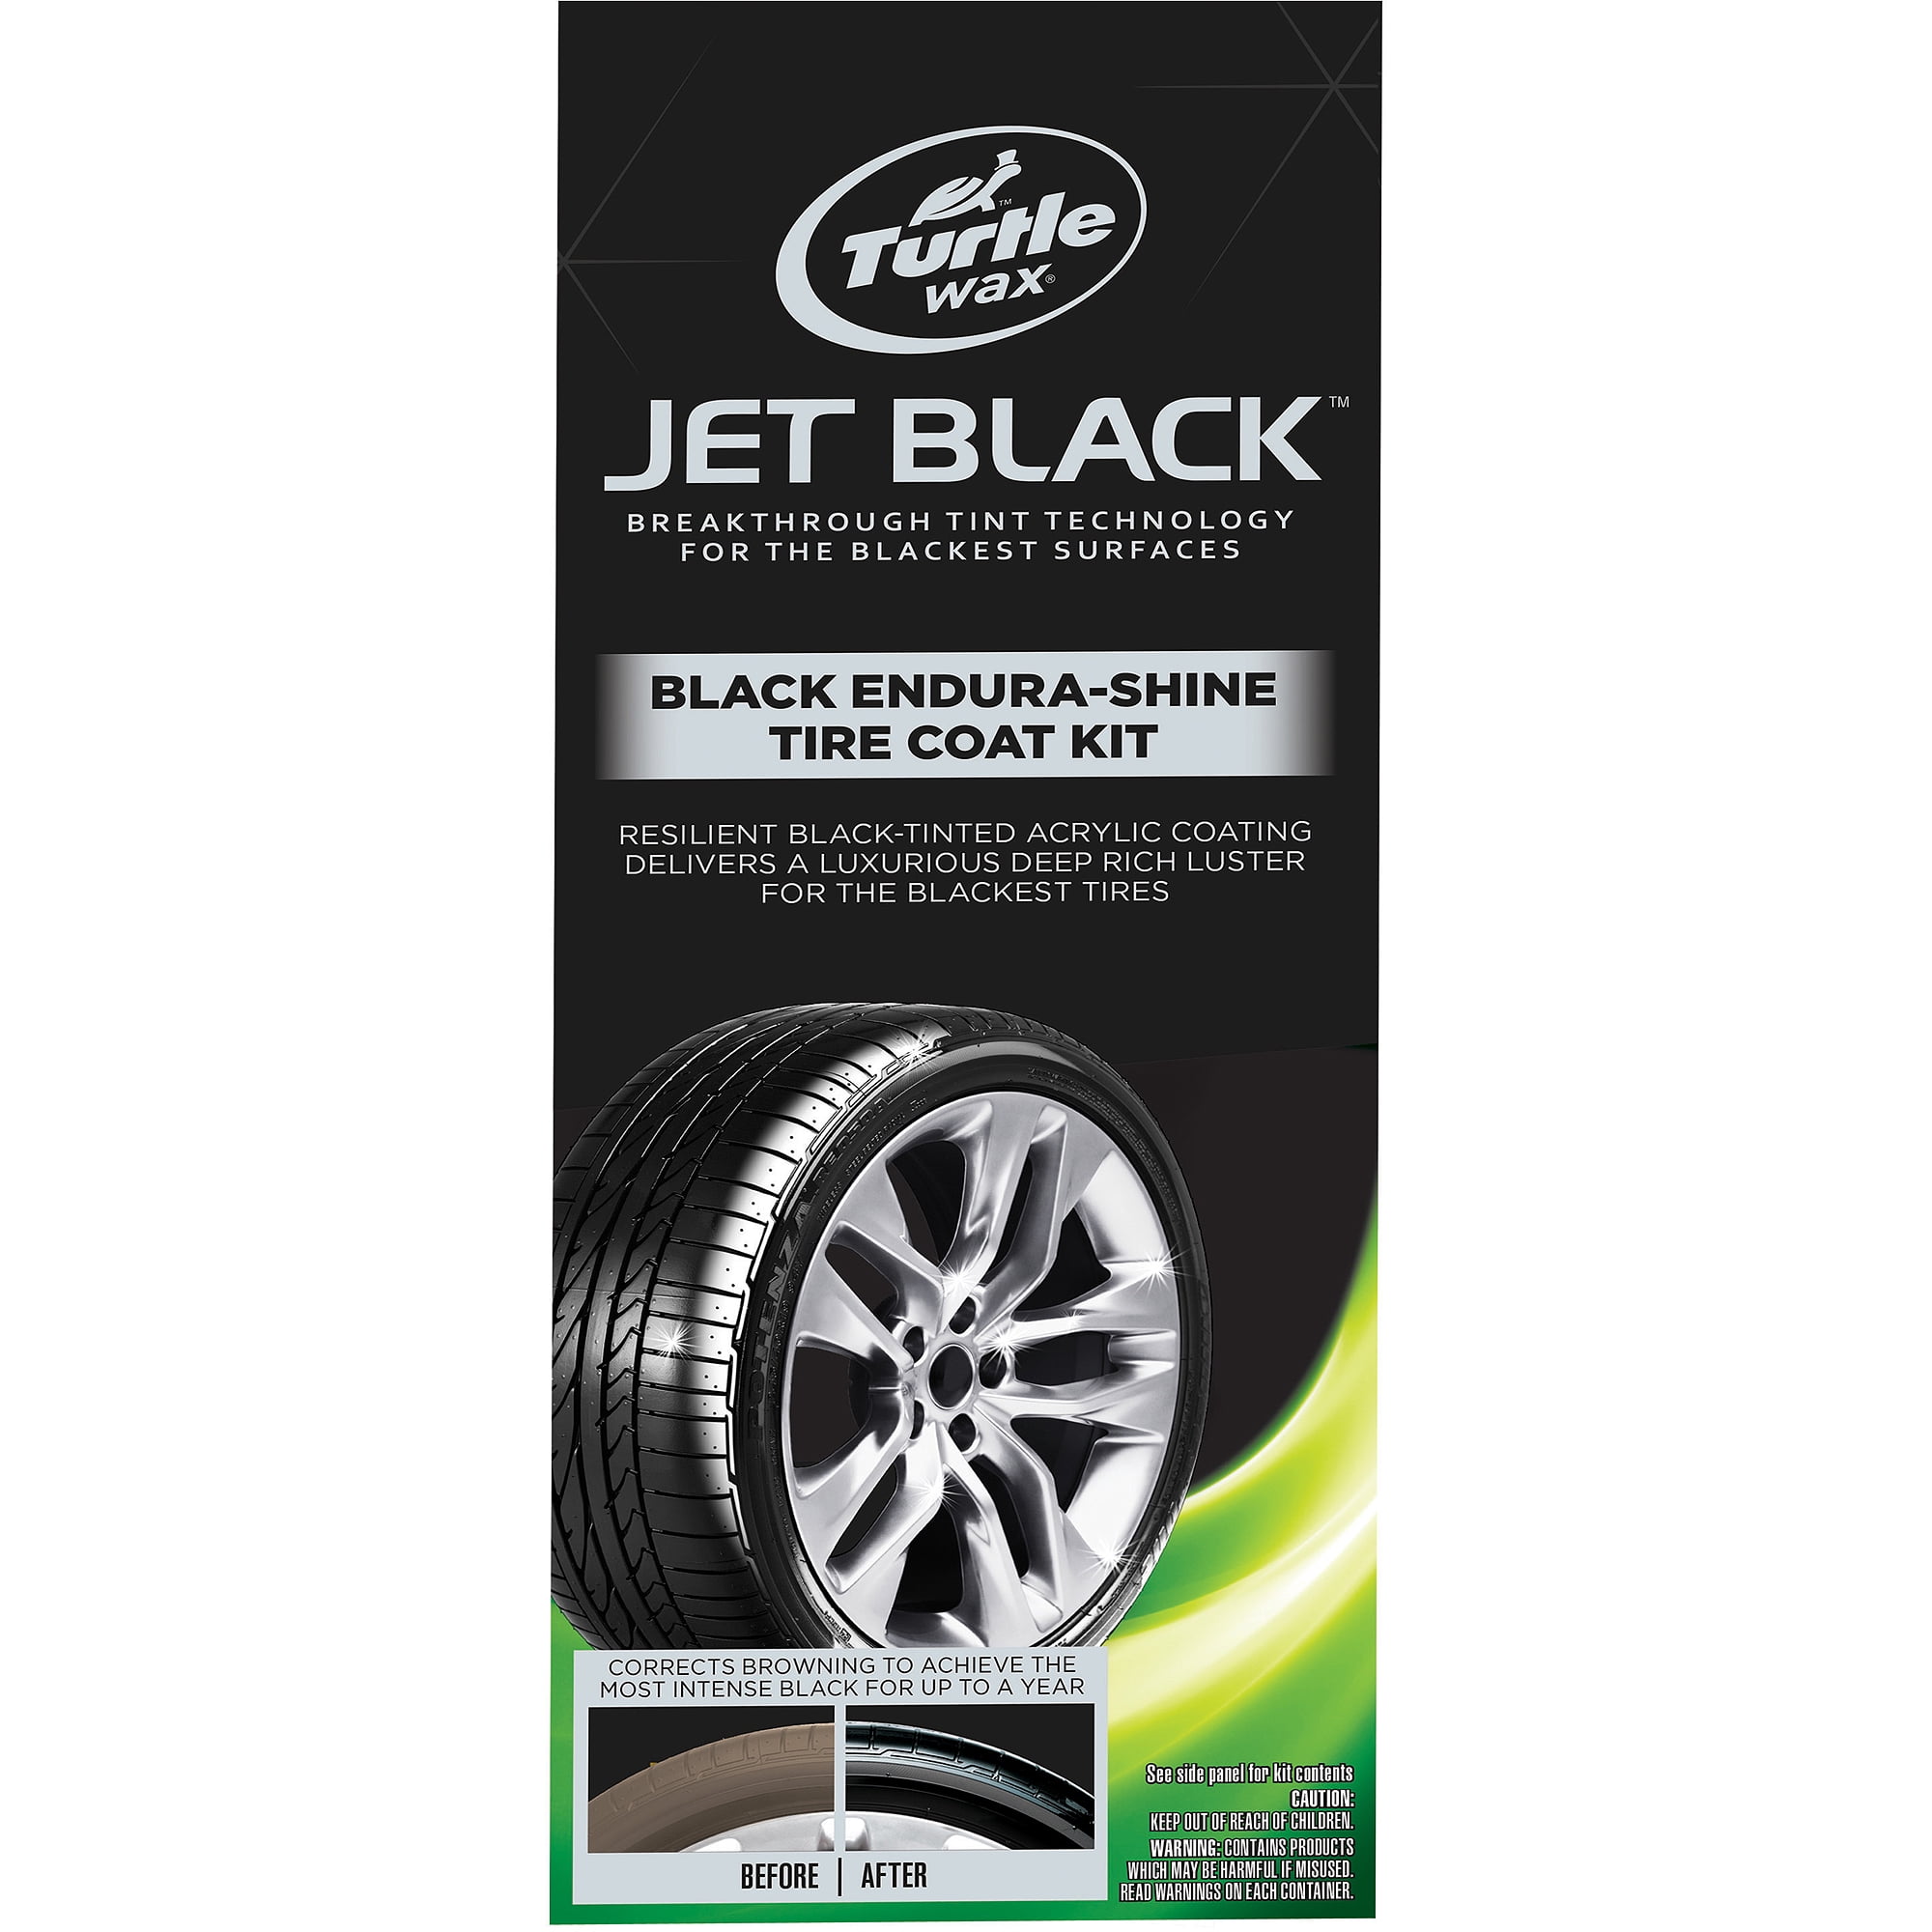 Give your Tires a Deep, Black Shine that Lasts a Year Long 